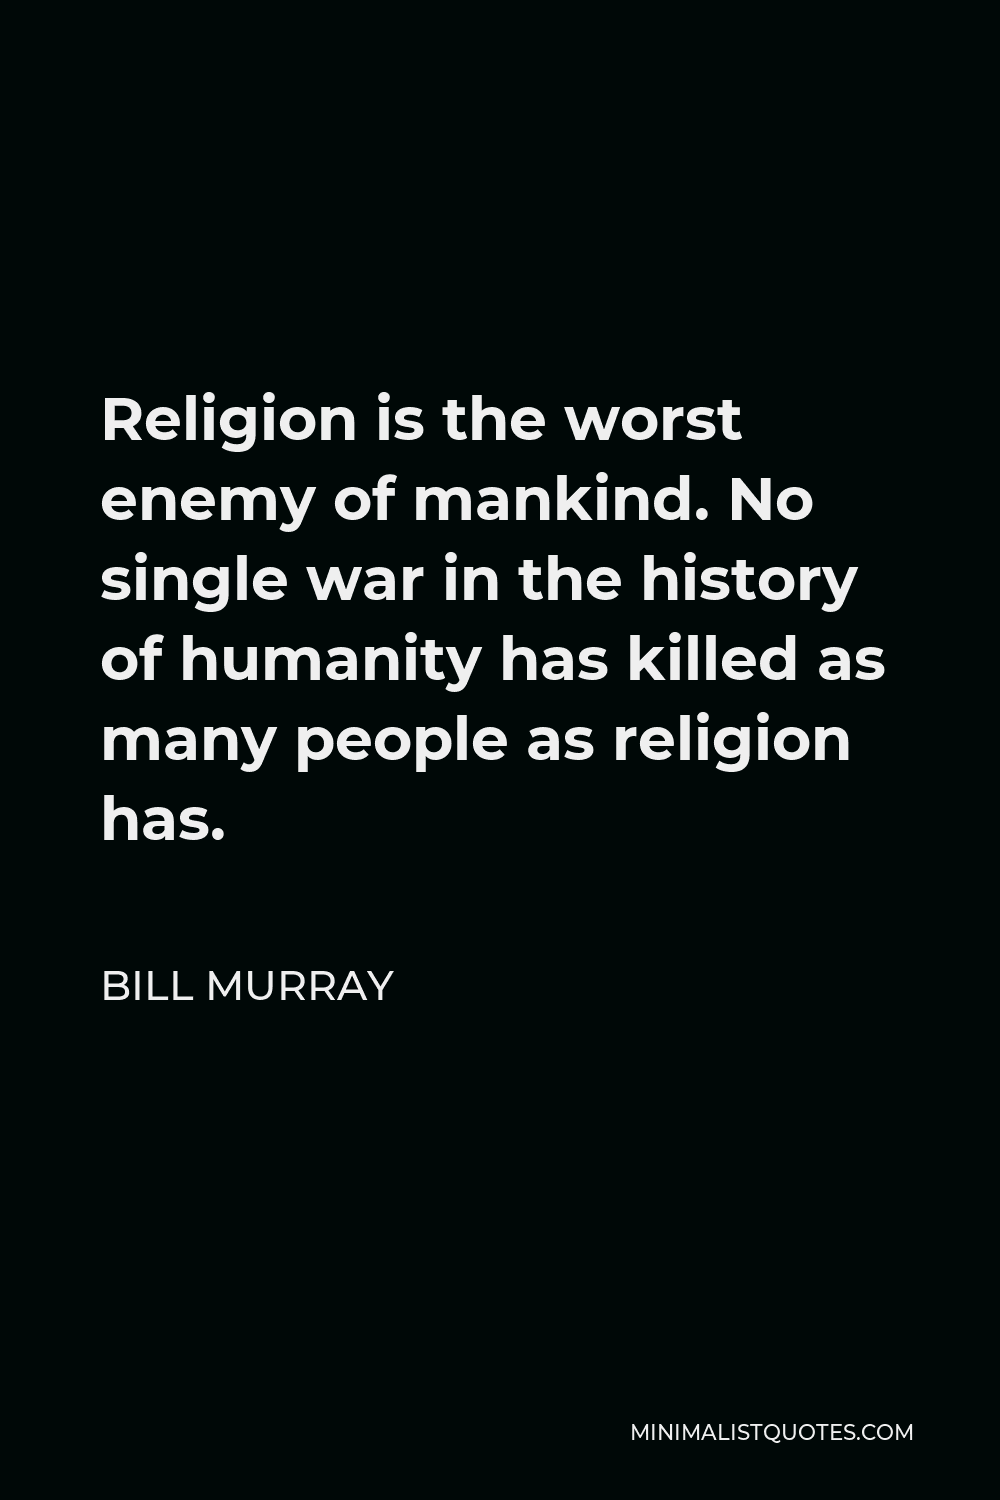 Bill Murray Quote - Religion is the worst enemy of mankind. No single war in the history of humanity has killed as many people as religion has.